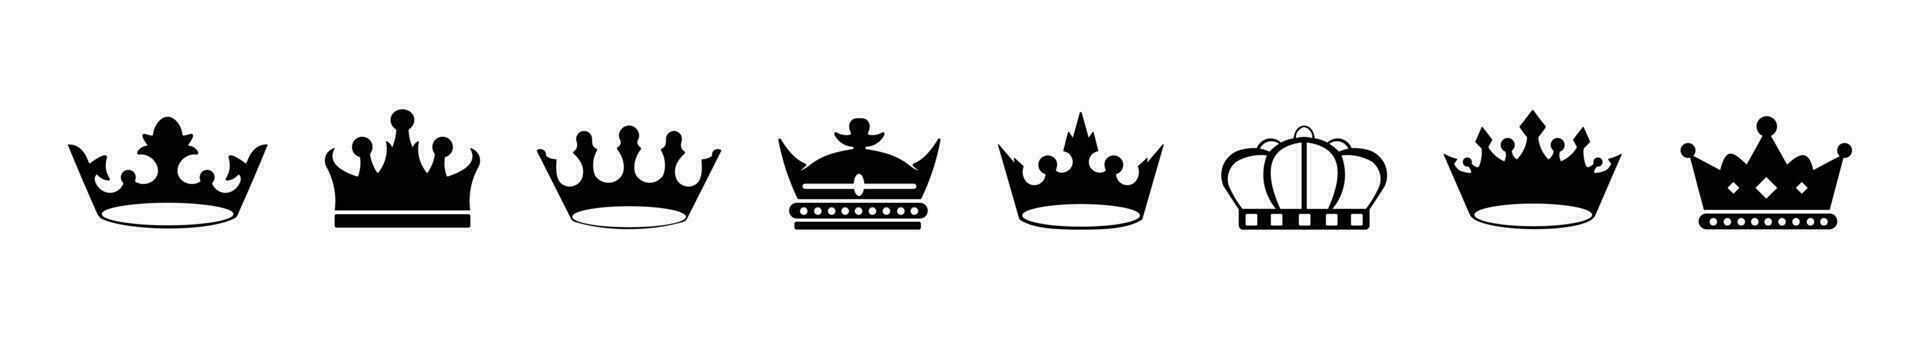 Crown set Royal icons collection set, Big collection crowns Vintage vector